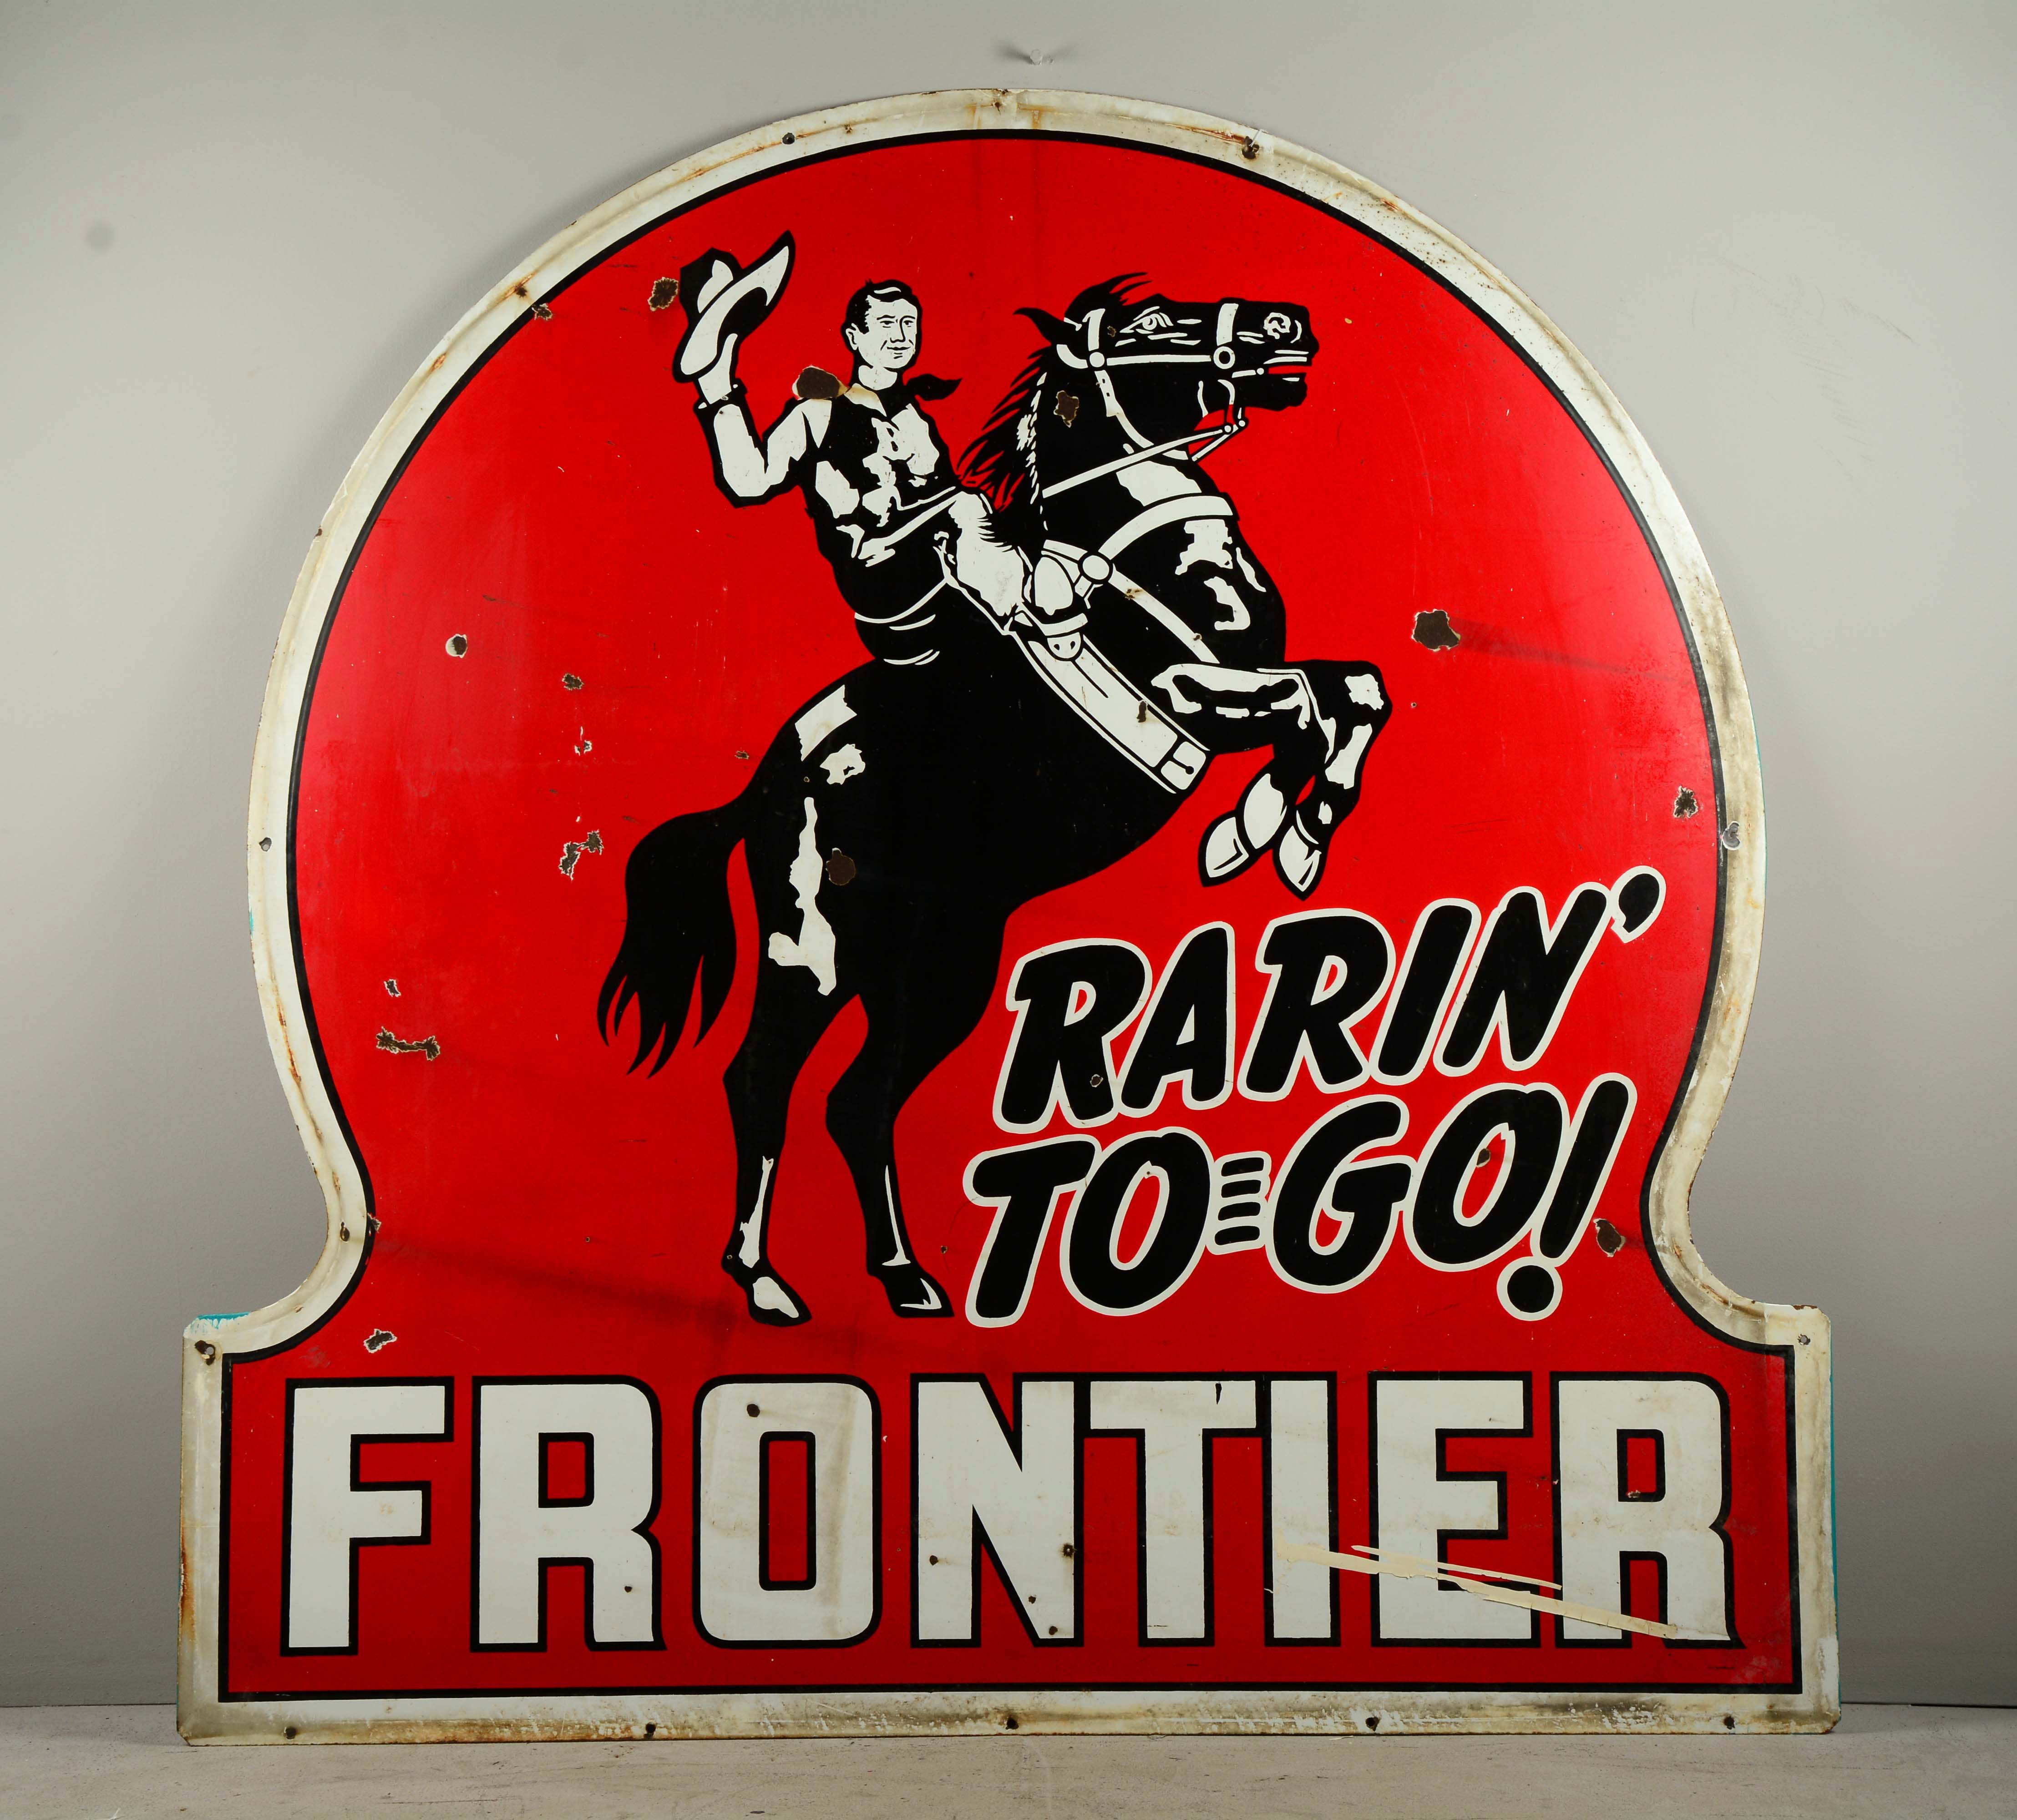 Frontier "Rarin'-to-Go" Keyhole Identification Porcelain Sign, estimated at $7,500-15,000.